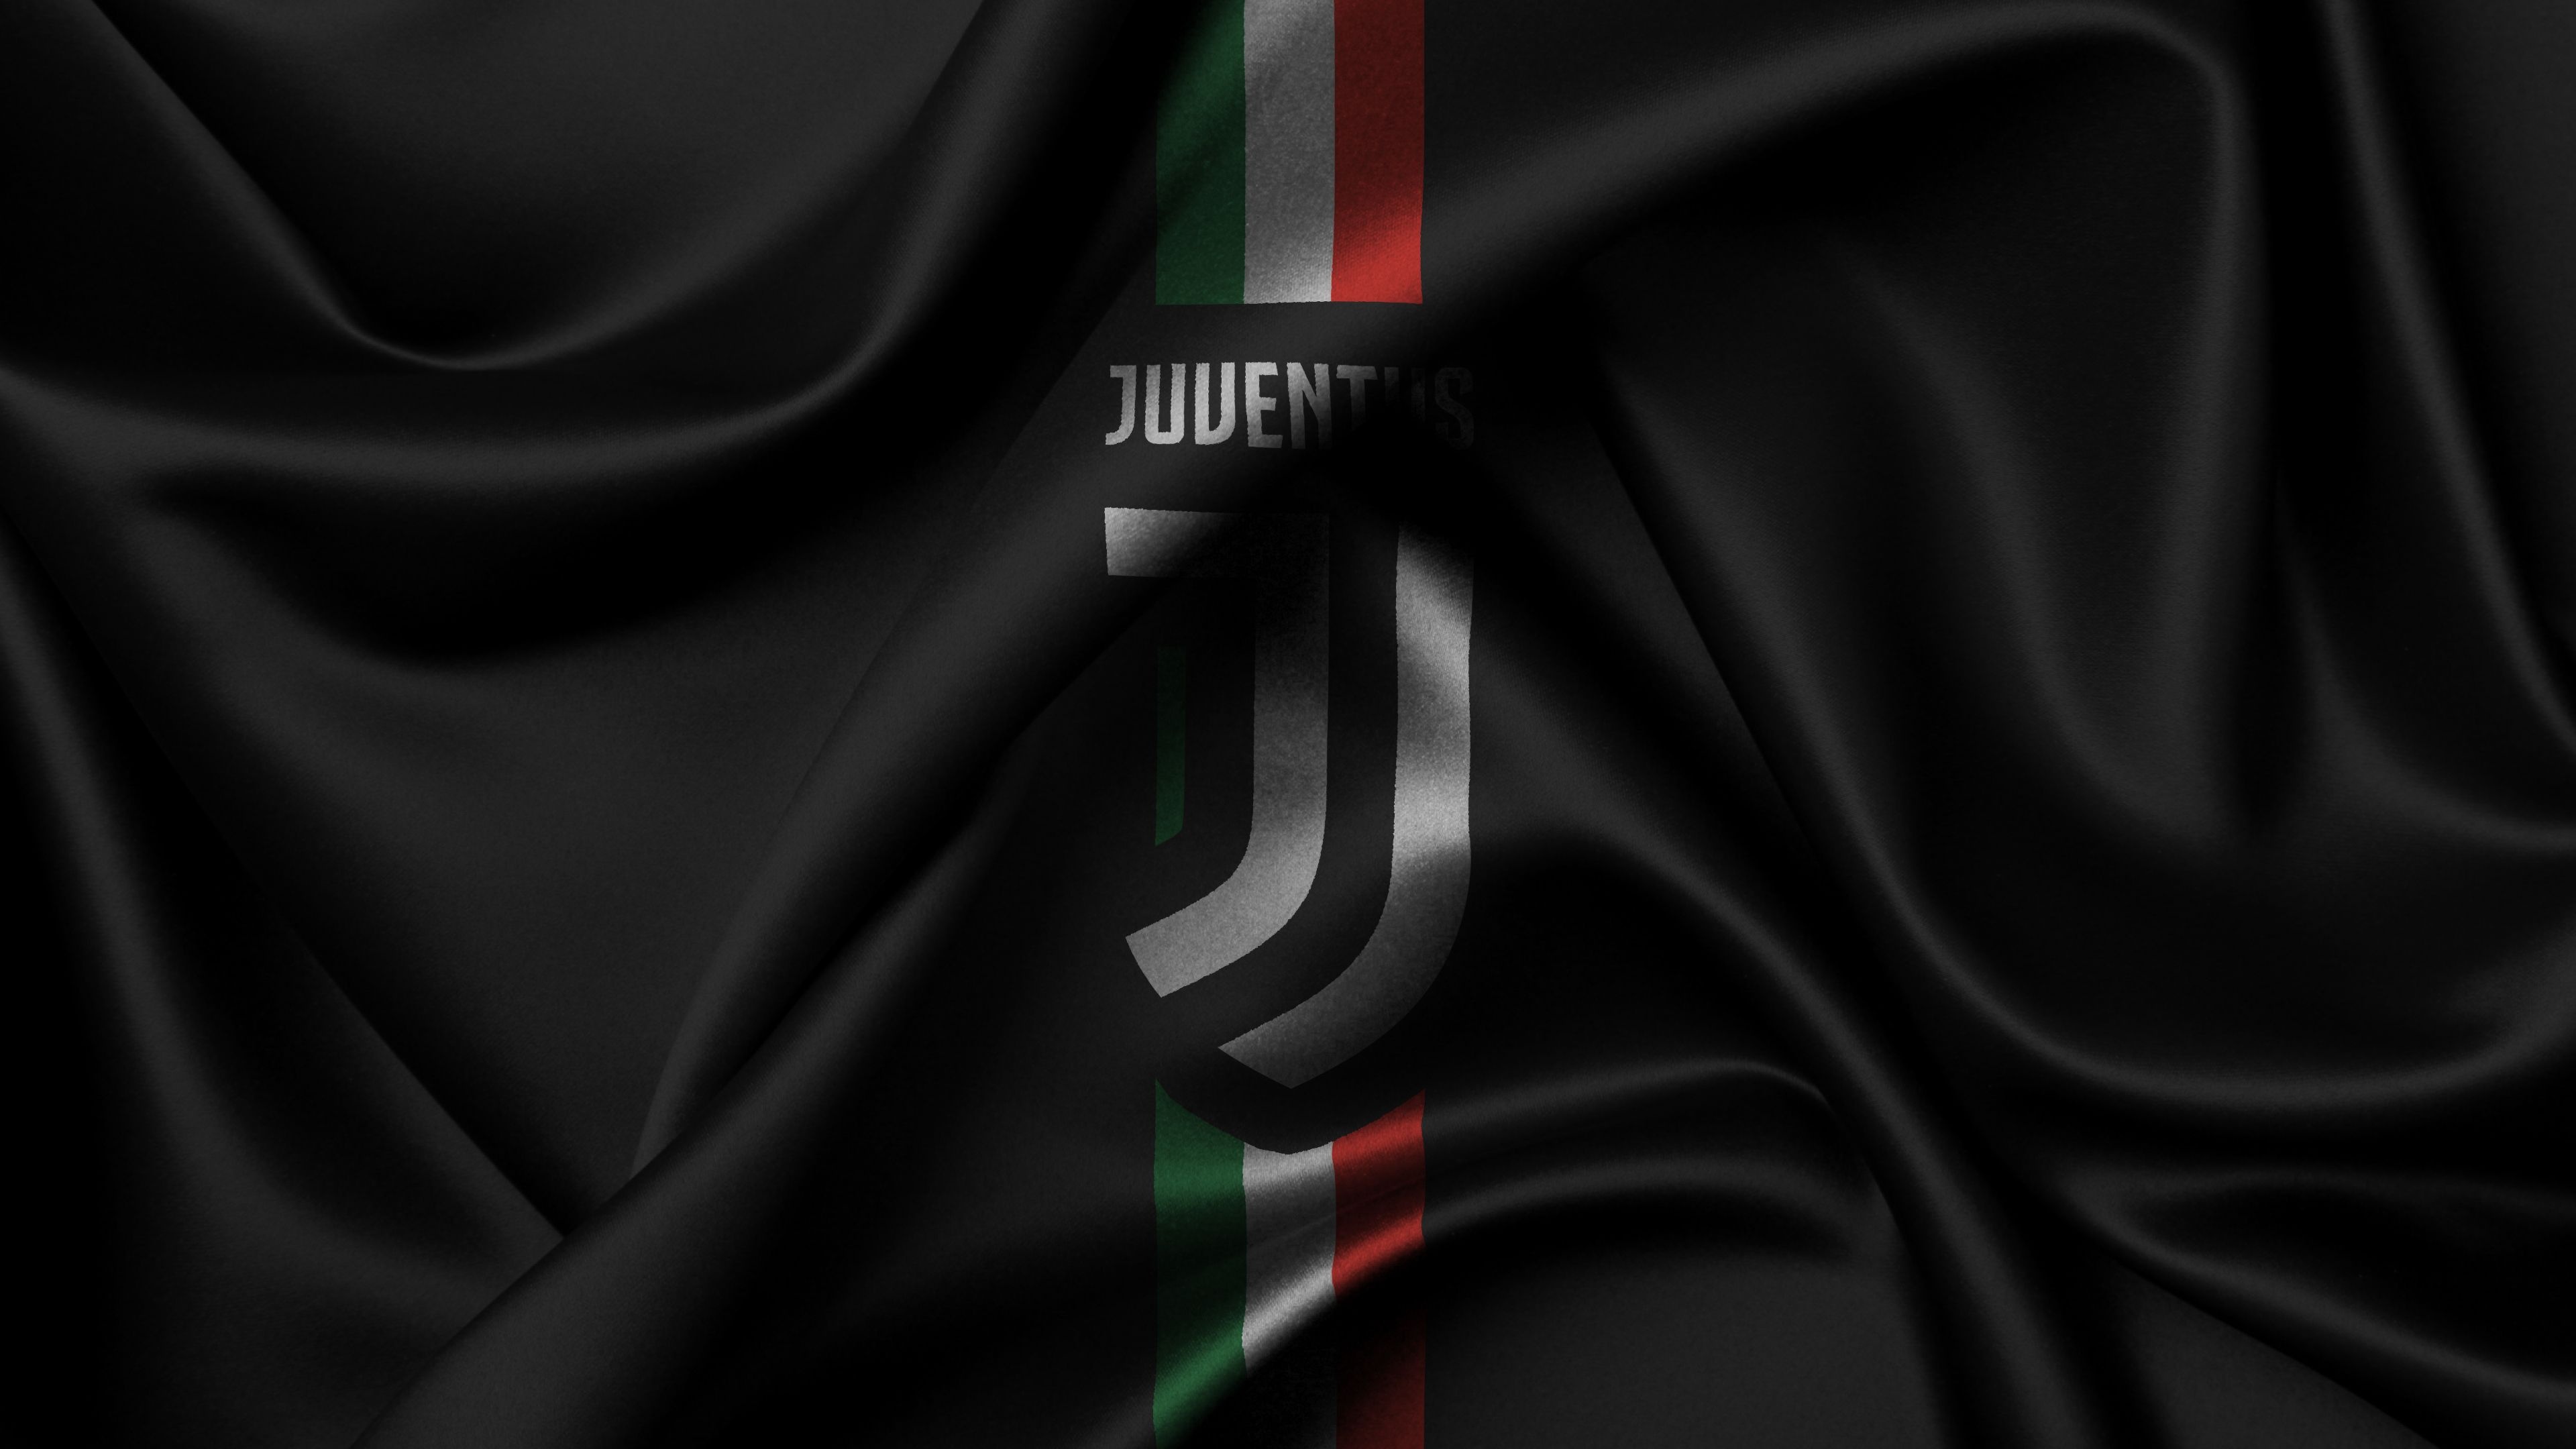 Juventus: Juve, A professional football club based in Turin, Piedmont, Italy. 3840x2160 4K Background.